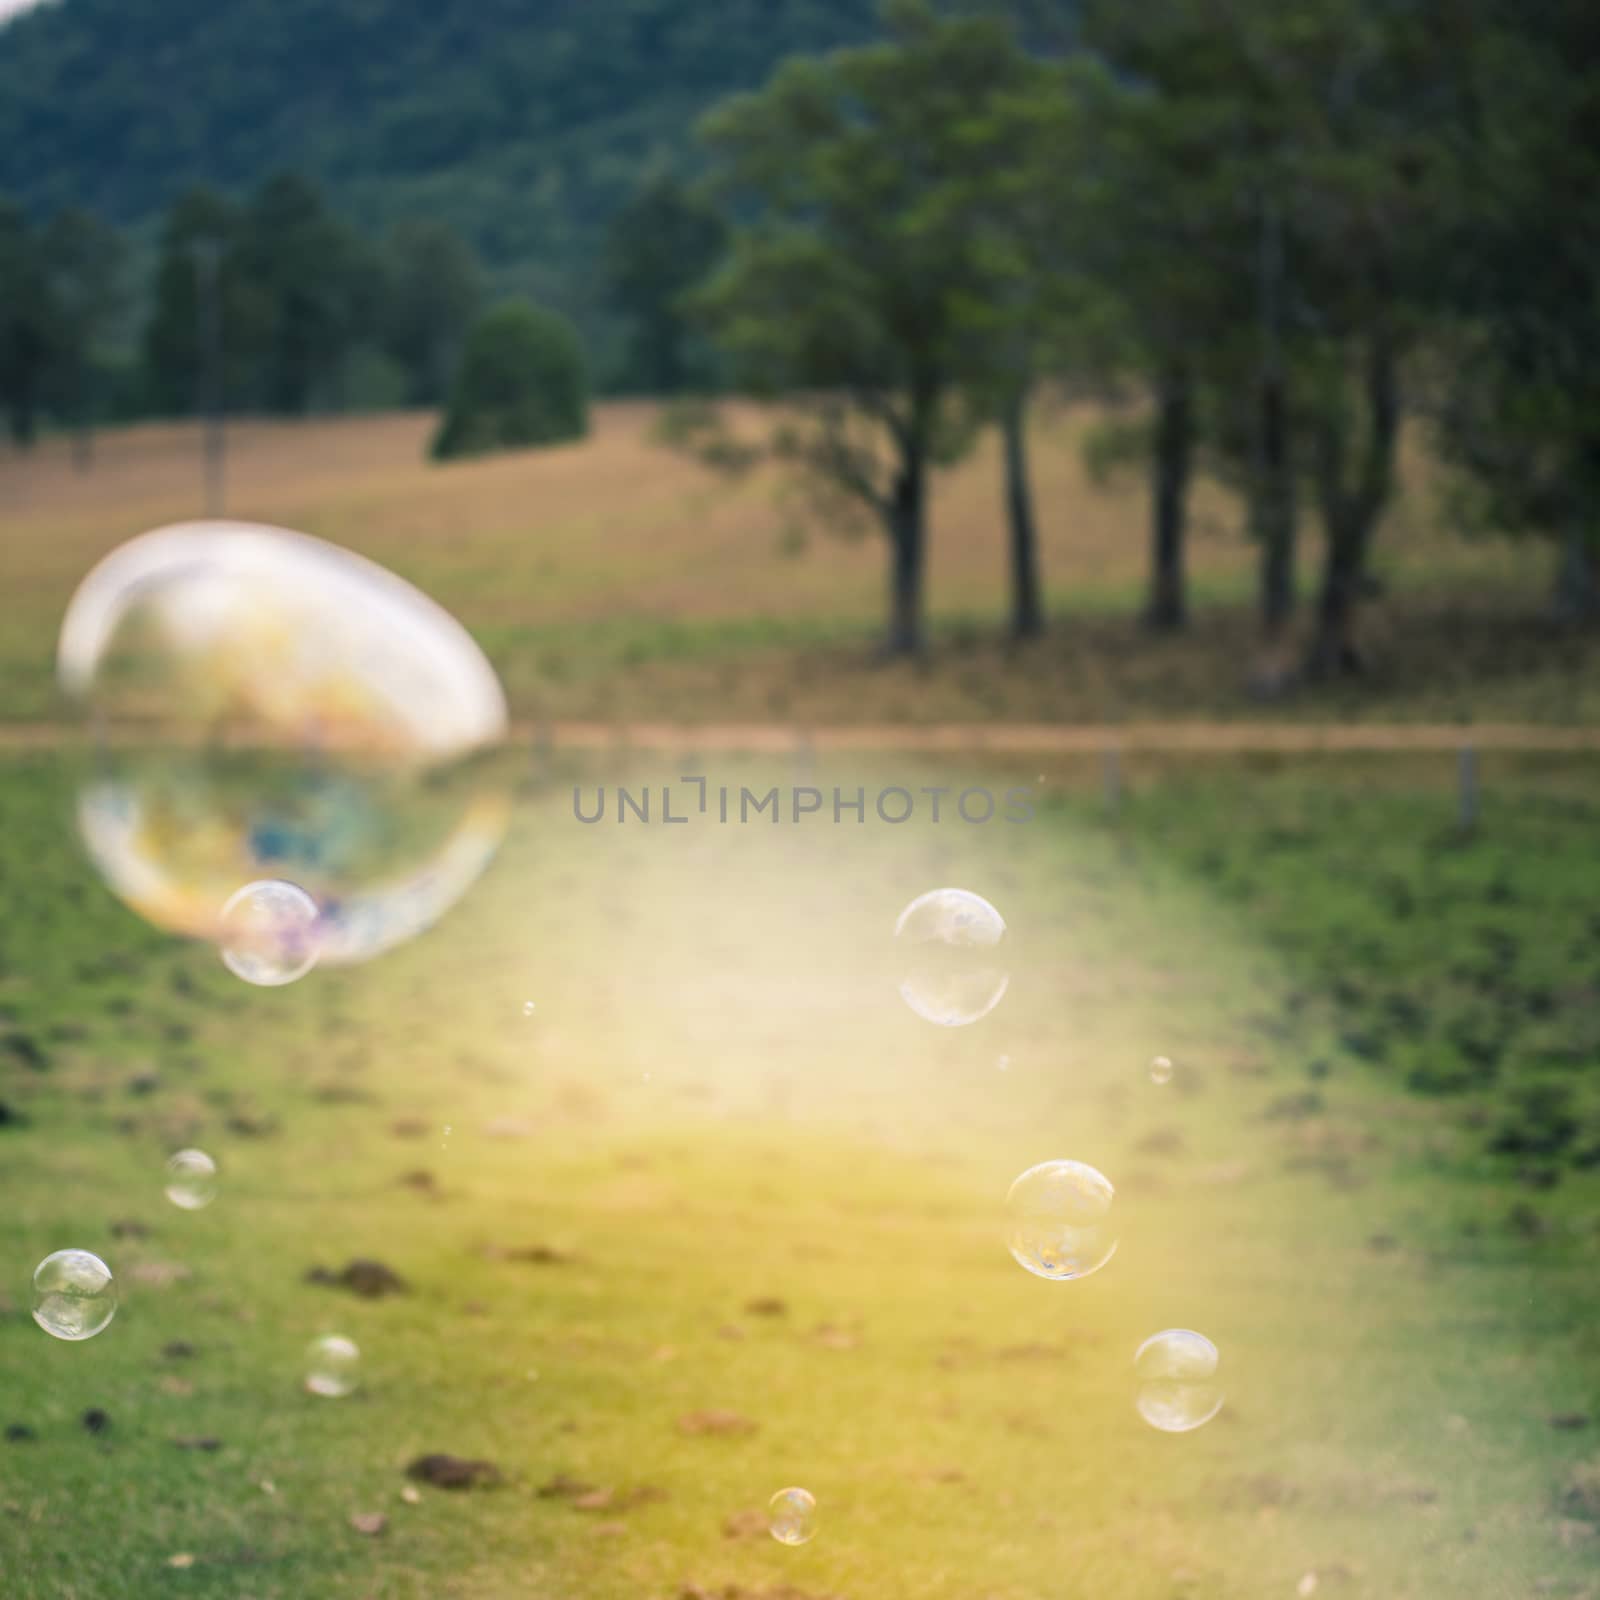 Bubbles in the air outside by artistrobd